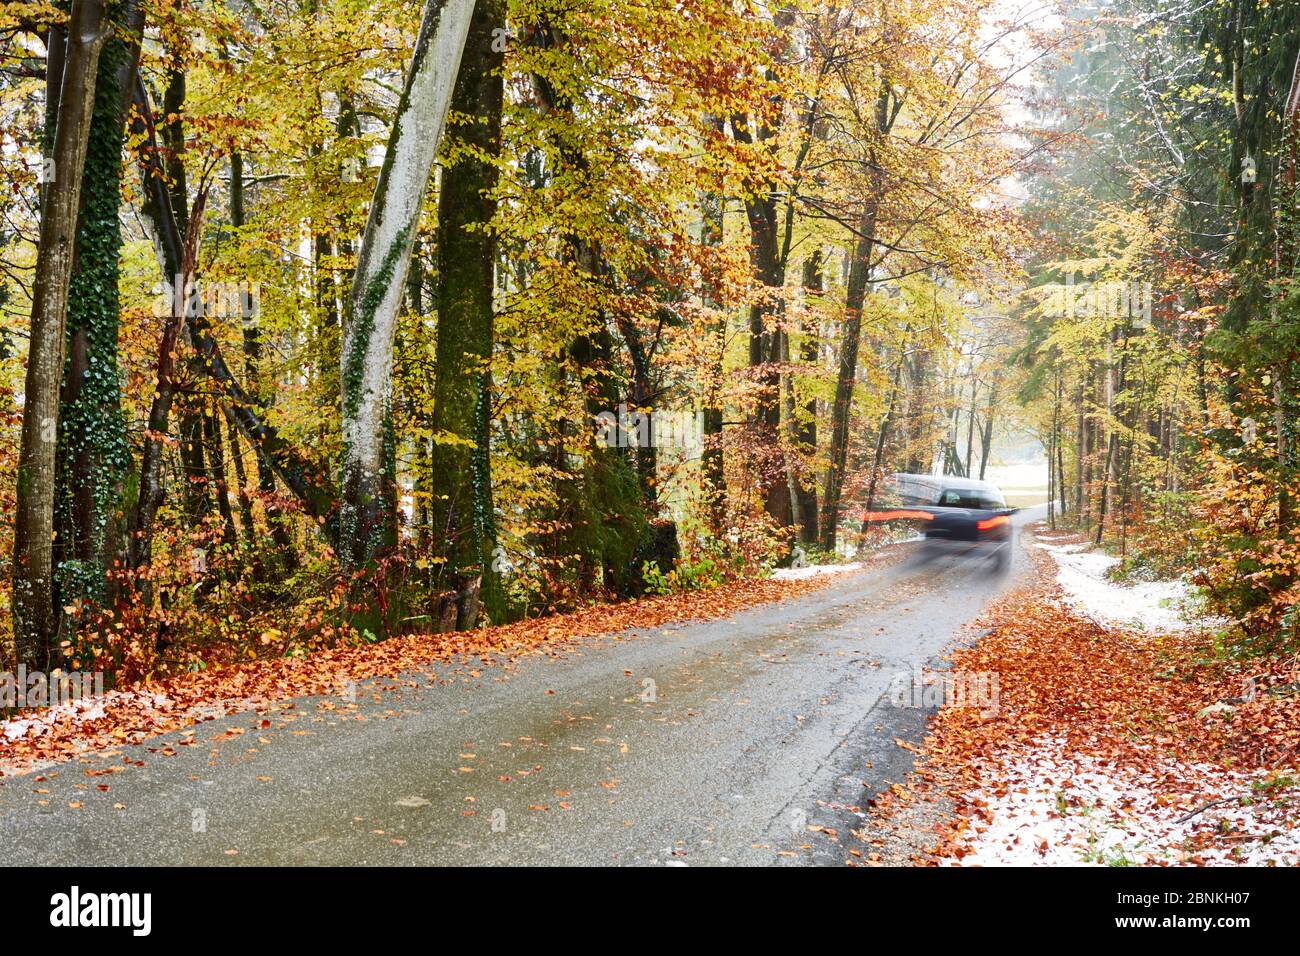 Country road, car, wet, snow, ice, slippery, autumn leaves, blurred Stock Photo